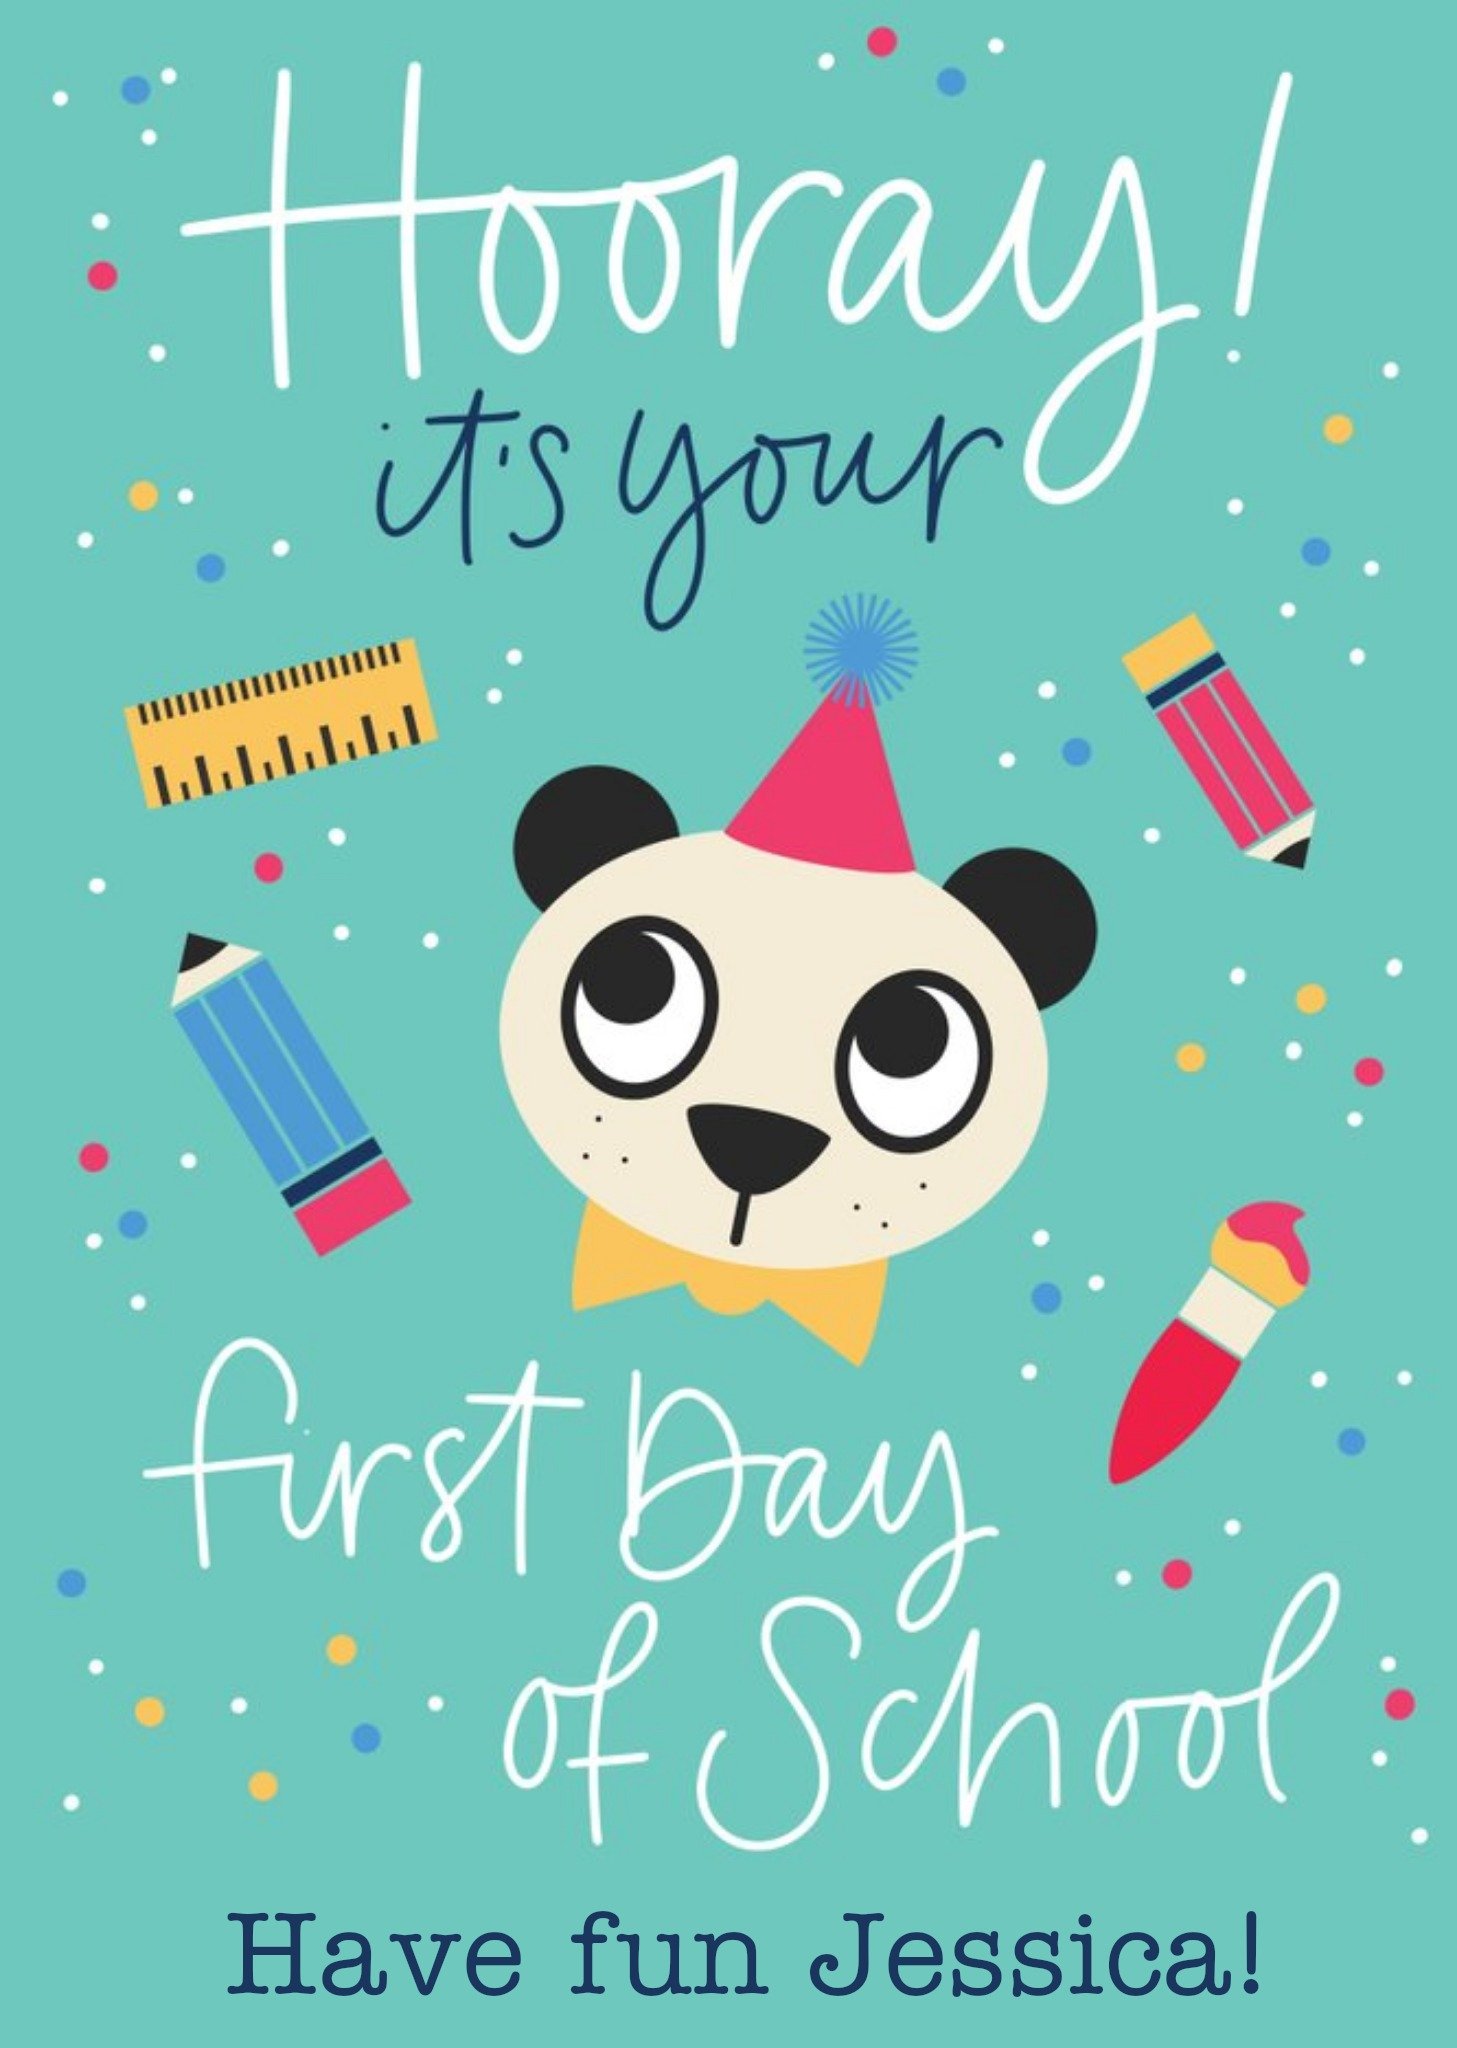 Moonpig Cute Illustration Of A Bear And Stationery Hooray Its Your First Day Of School Card Ecard